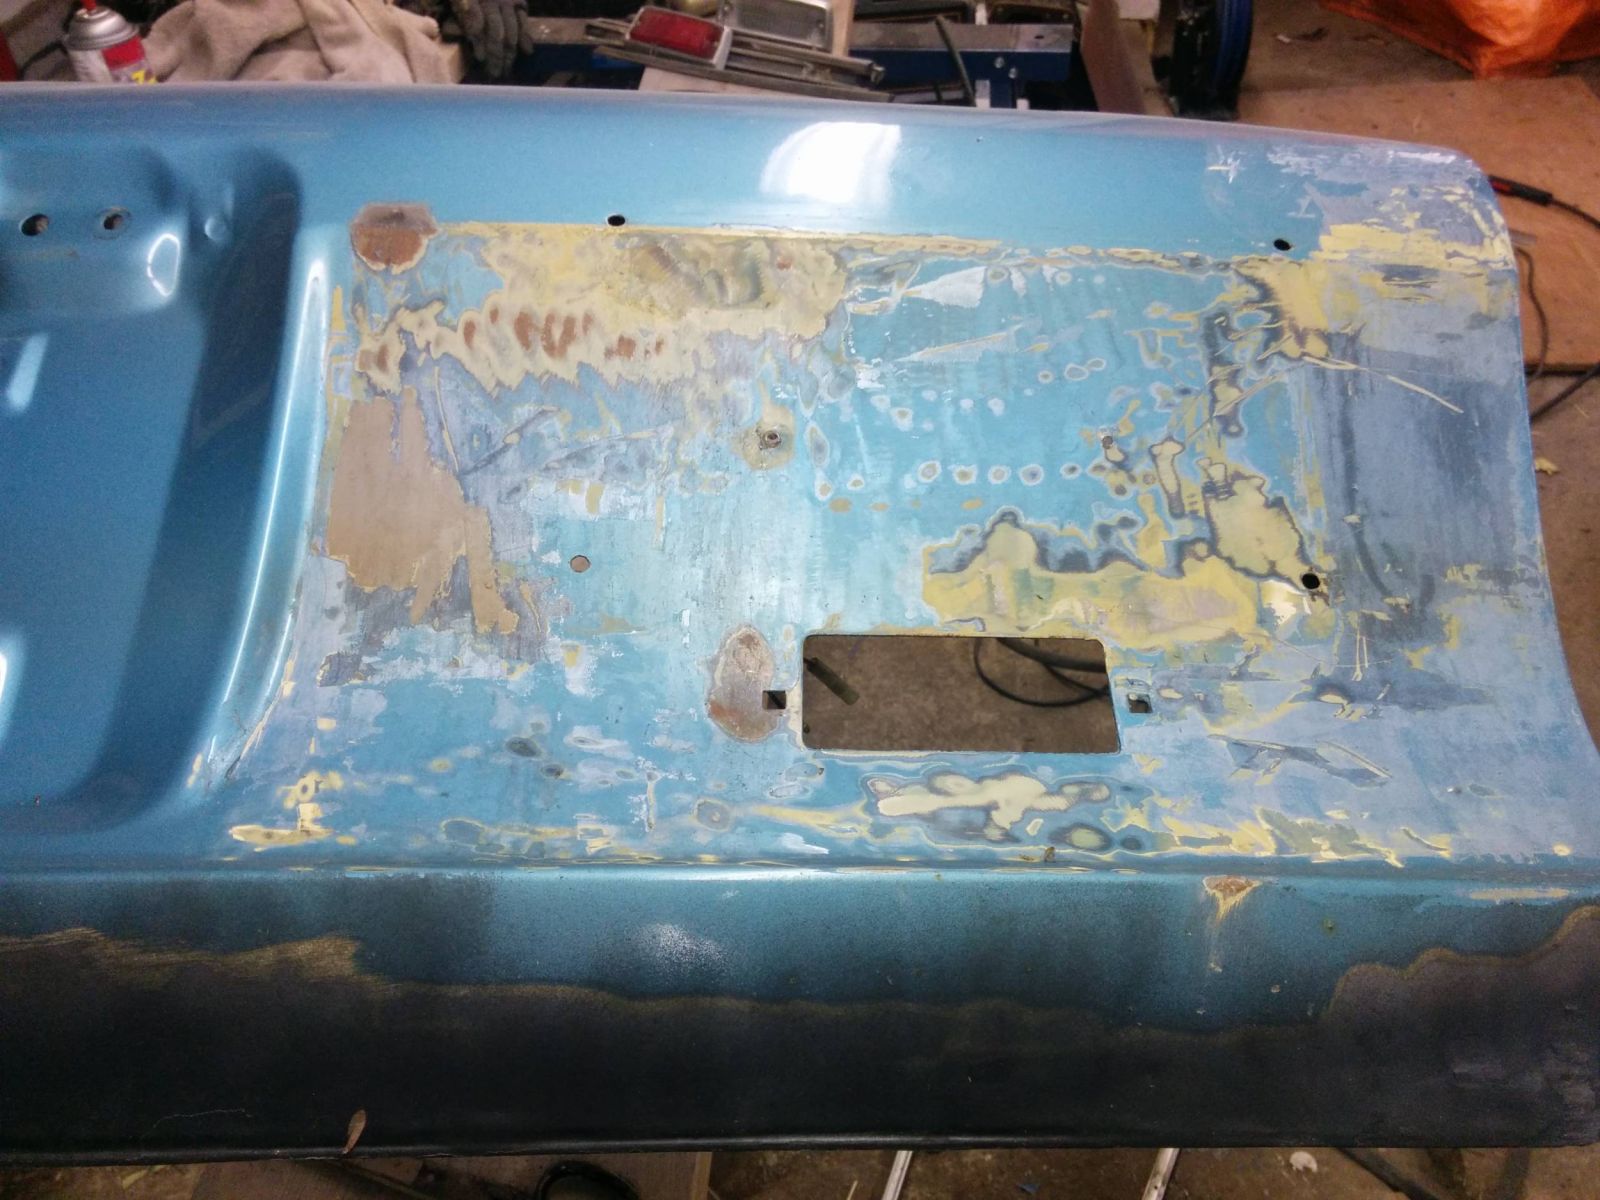 Liftgate after "wood" removed